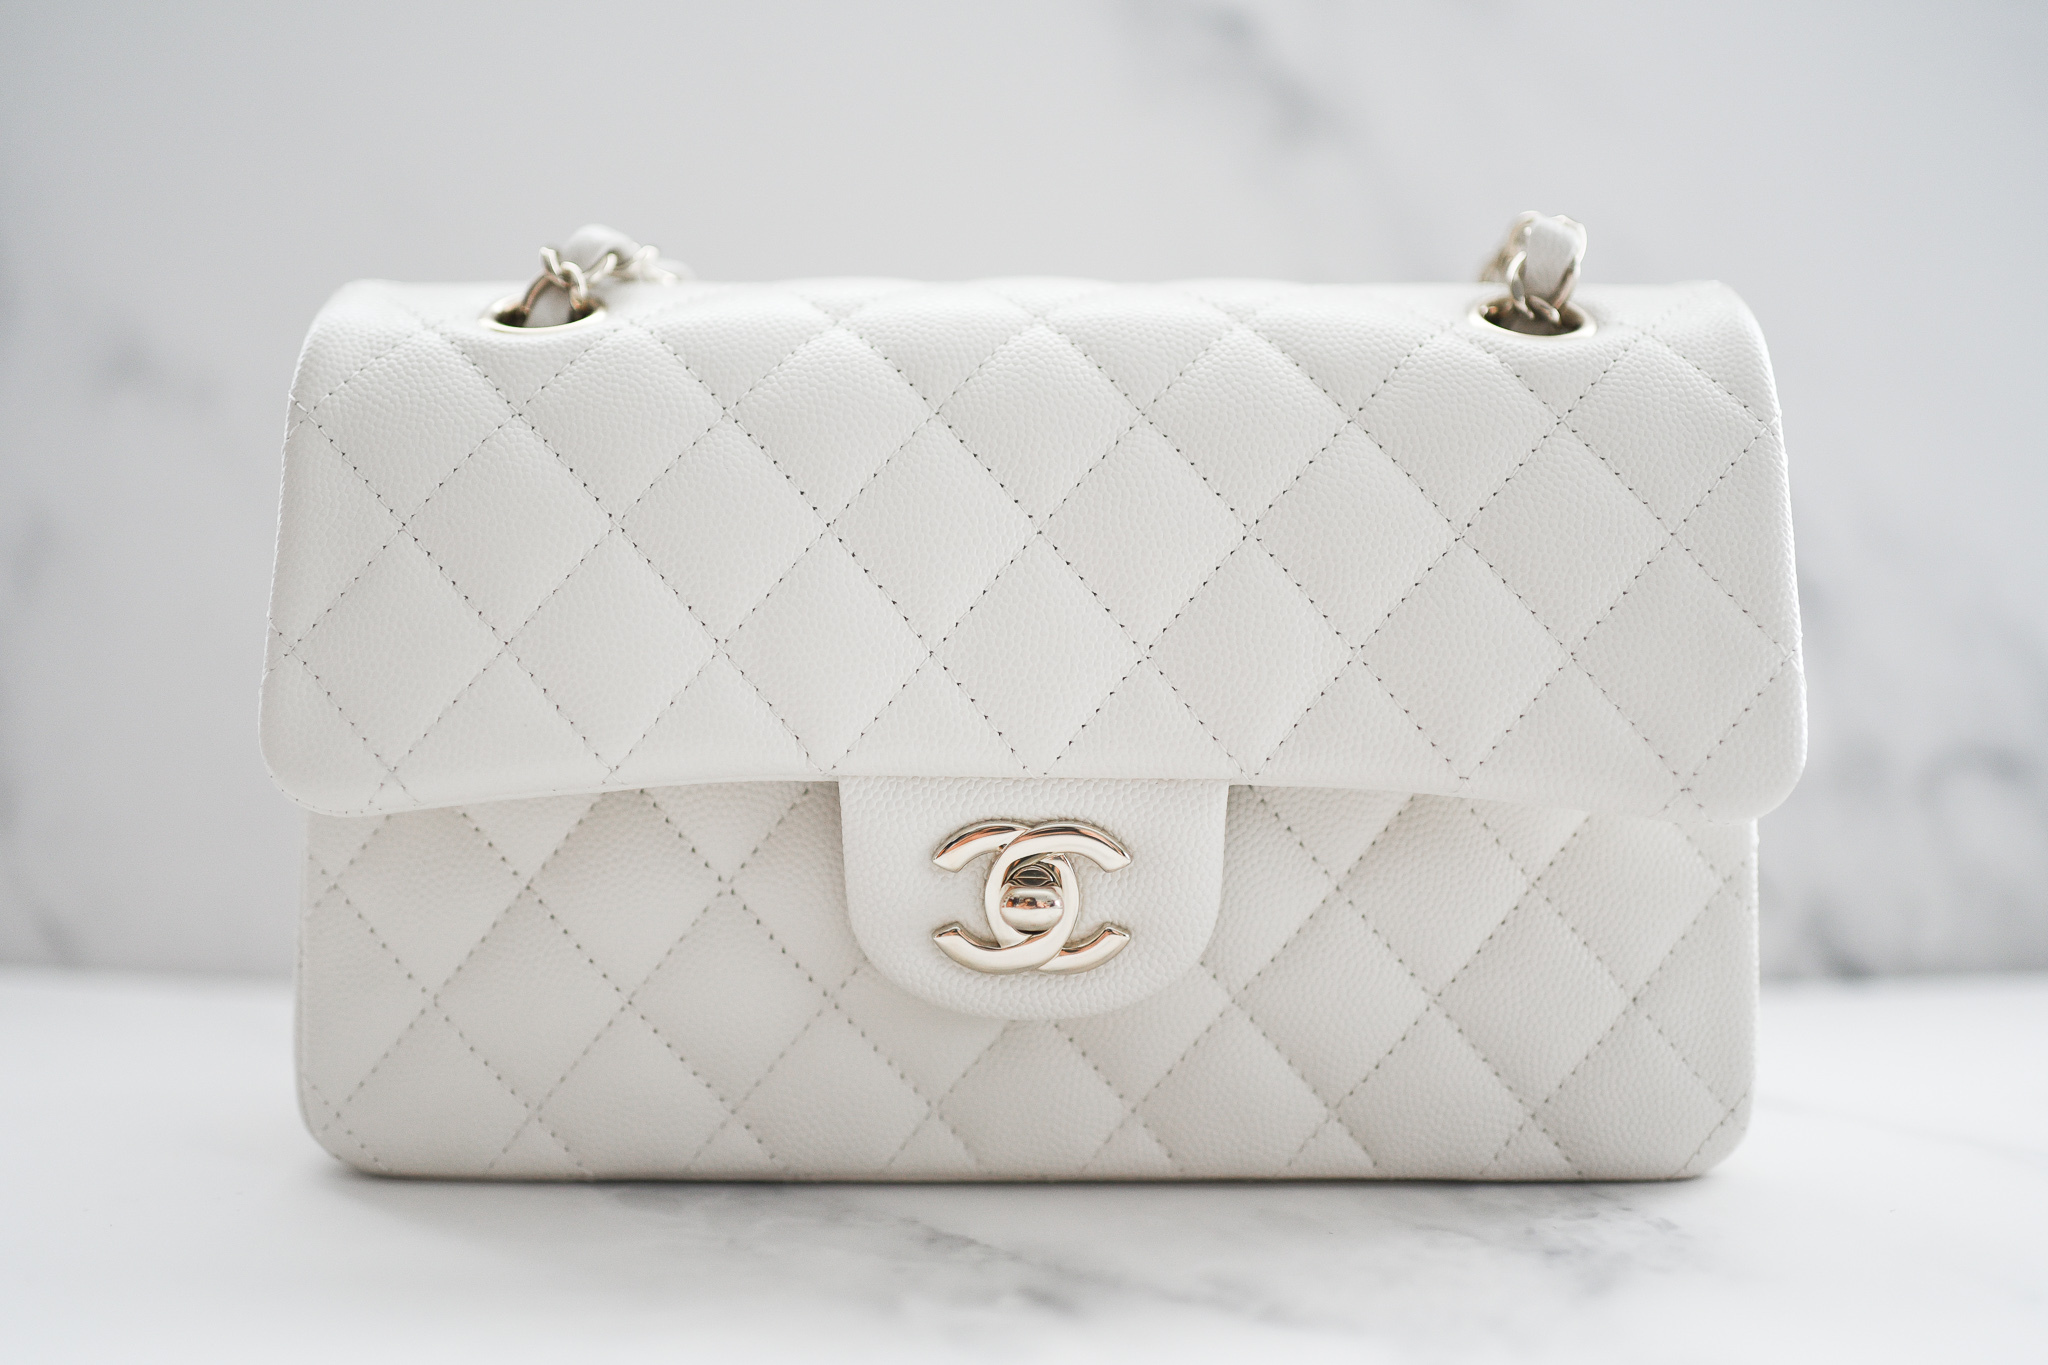 chanel bag white and gold